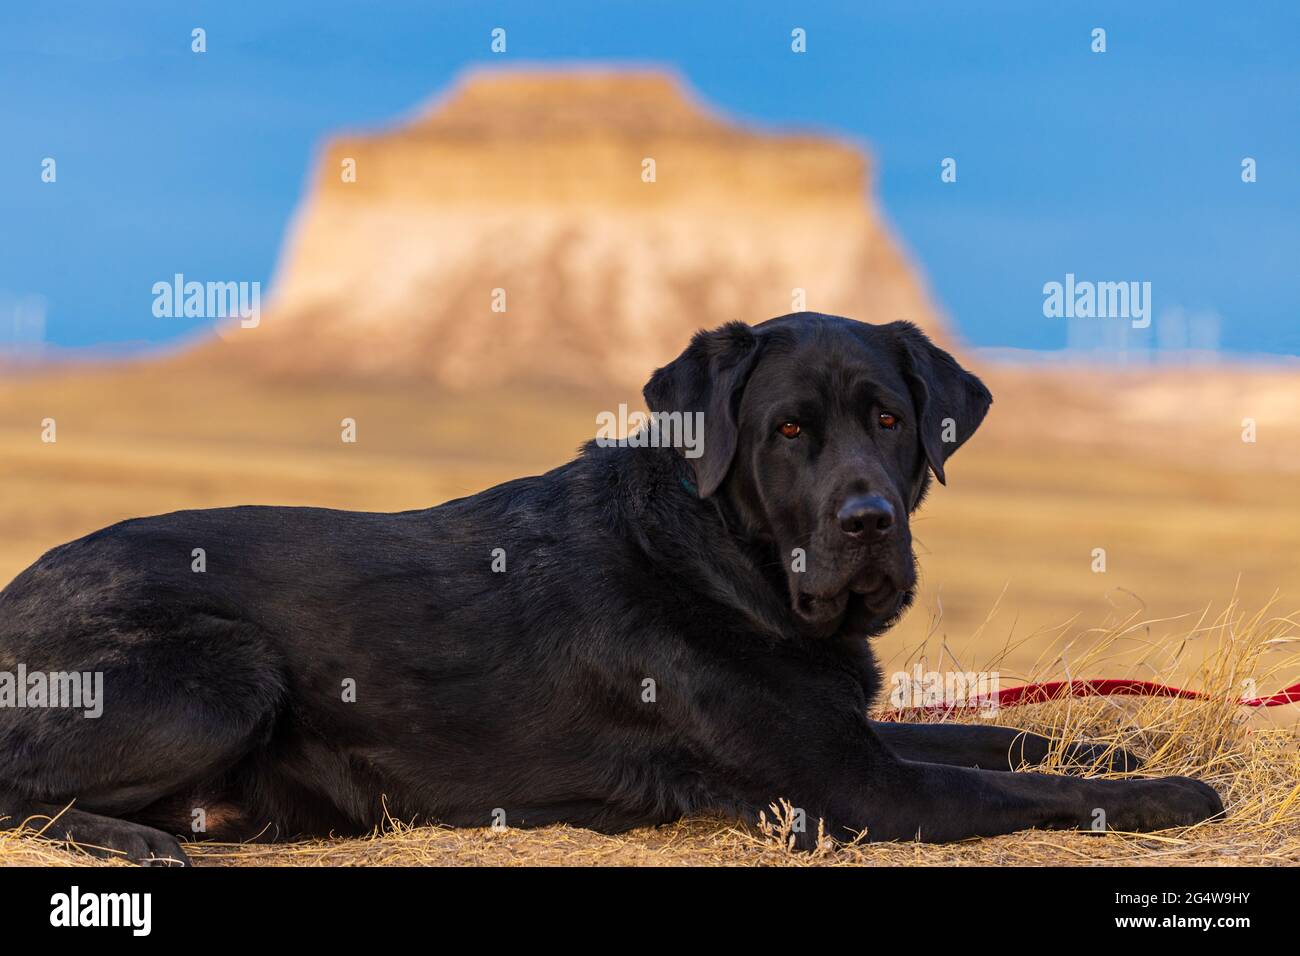 Black labrador retriever dog lays in the dirt at Pawnee National Grasslands with the Pawnee butte off in the distance and blue skies overhead. Stock Photo